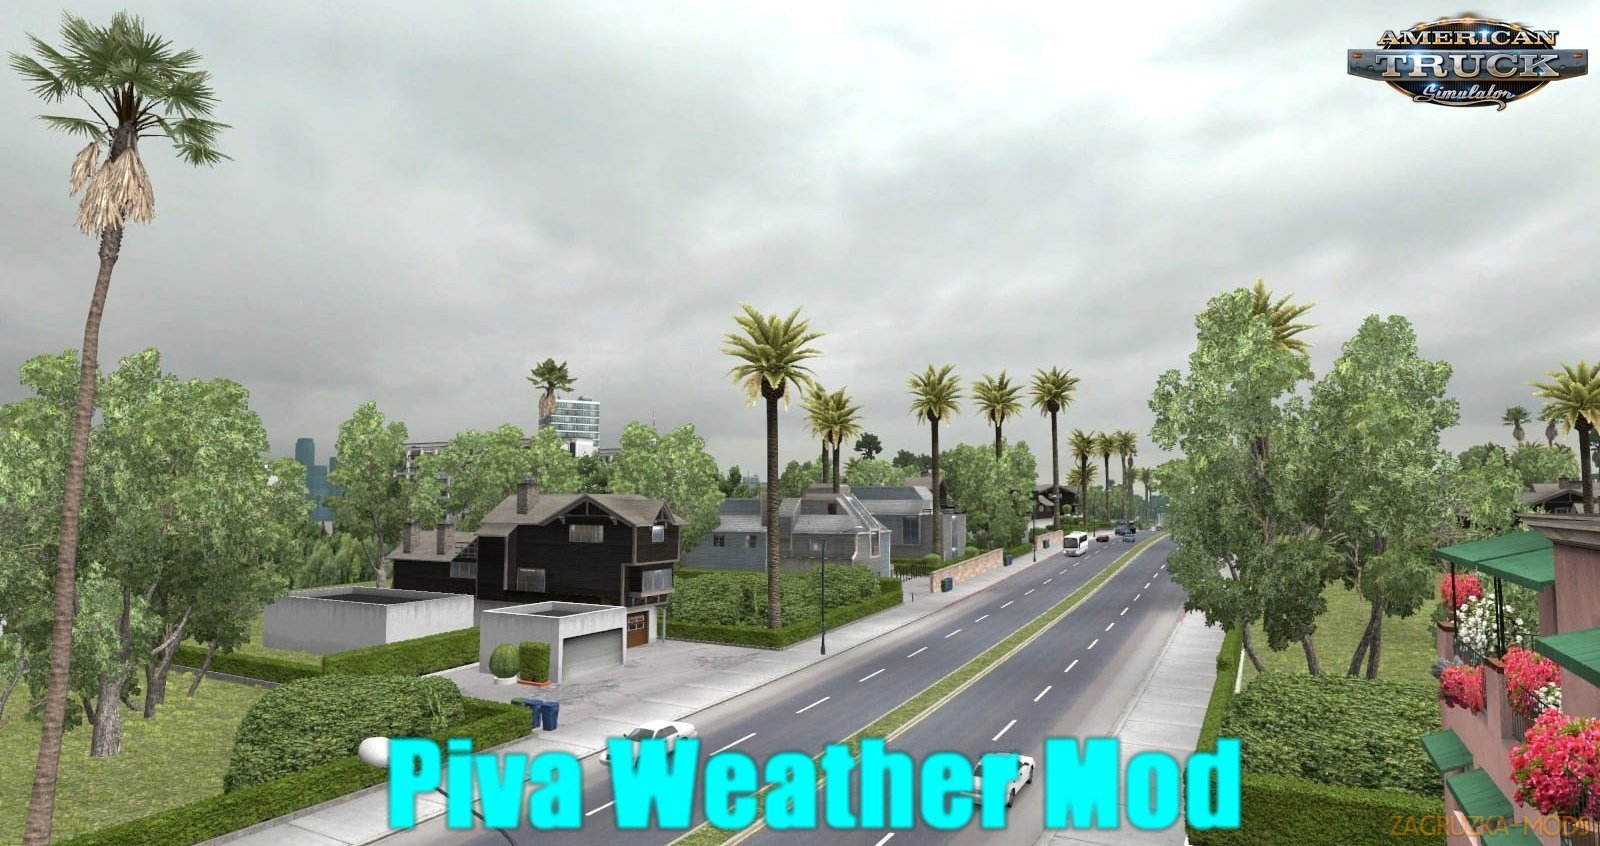 Piva Weather Mod v3.3 (1.29.x) for ATS